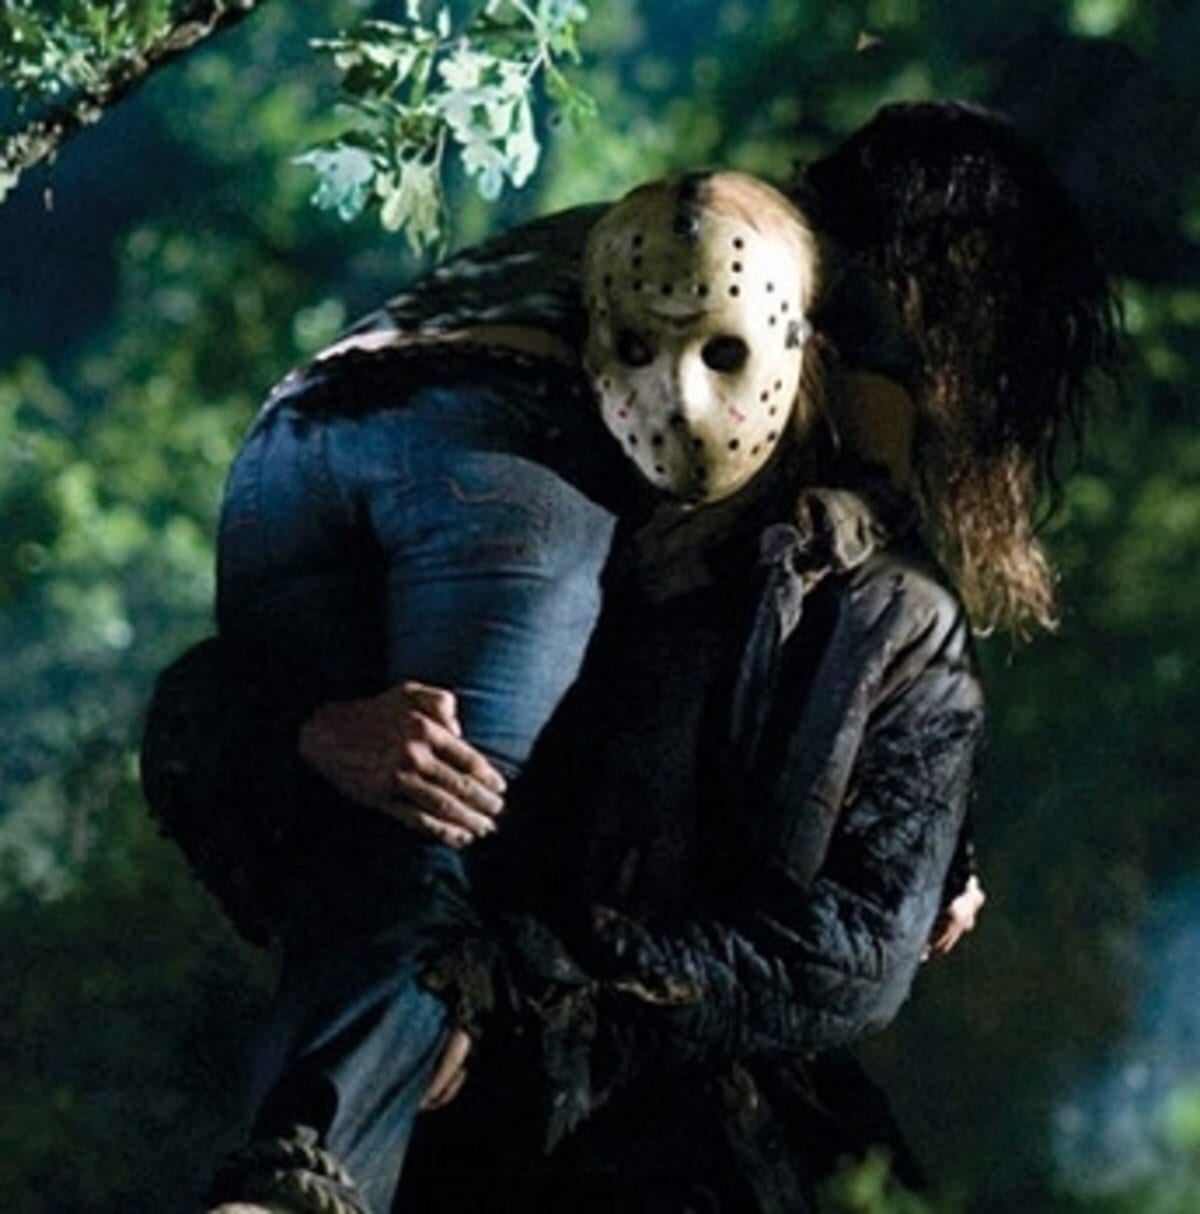 Jason Voorhees carrying a dead body